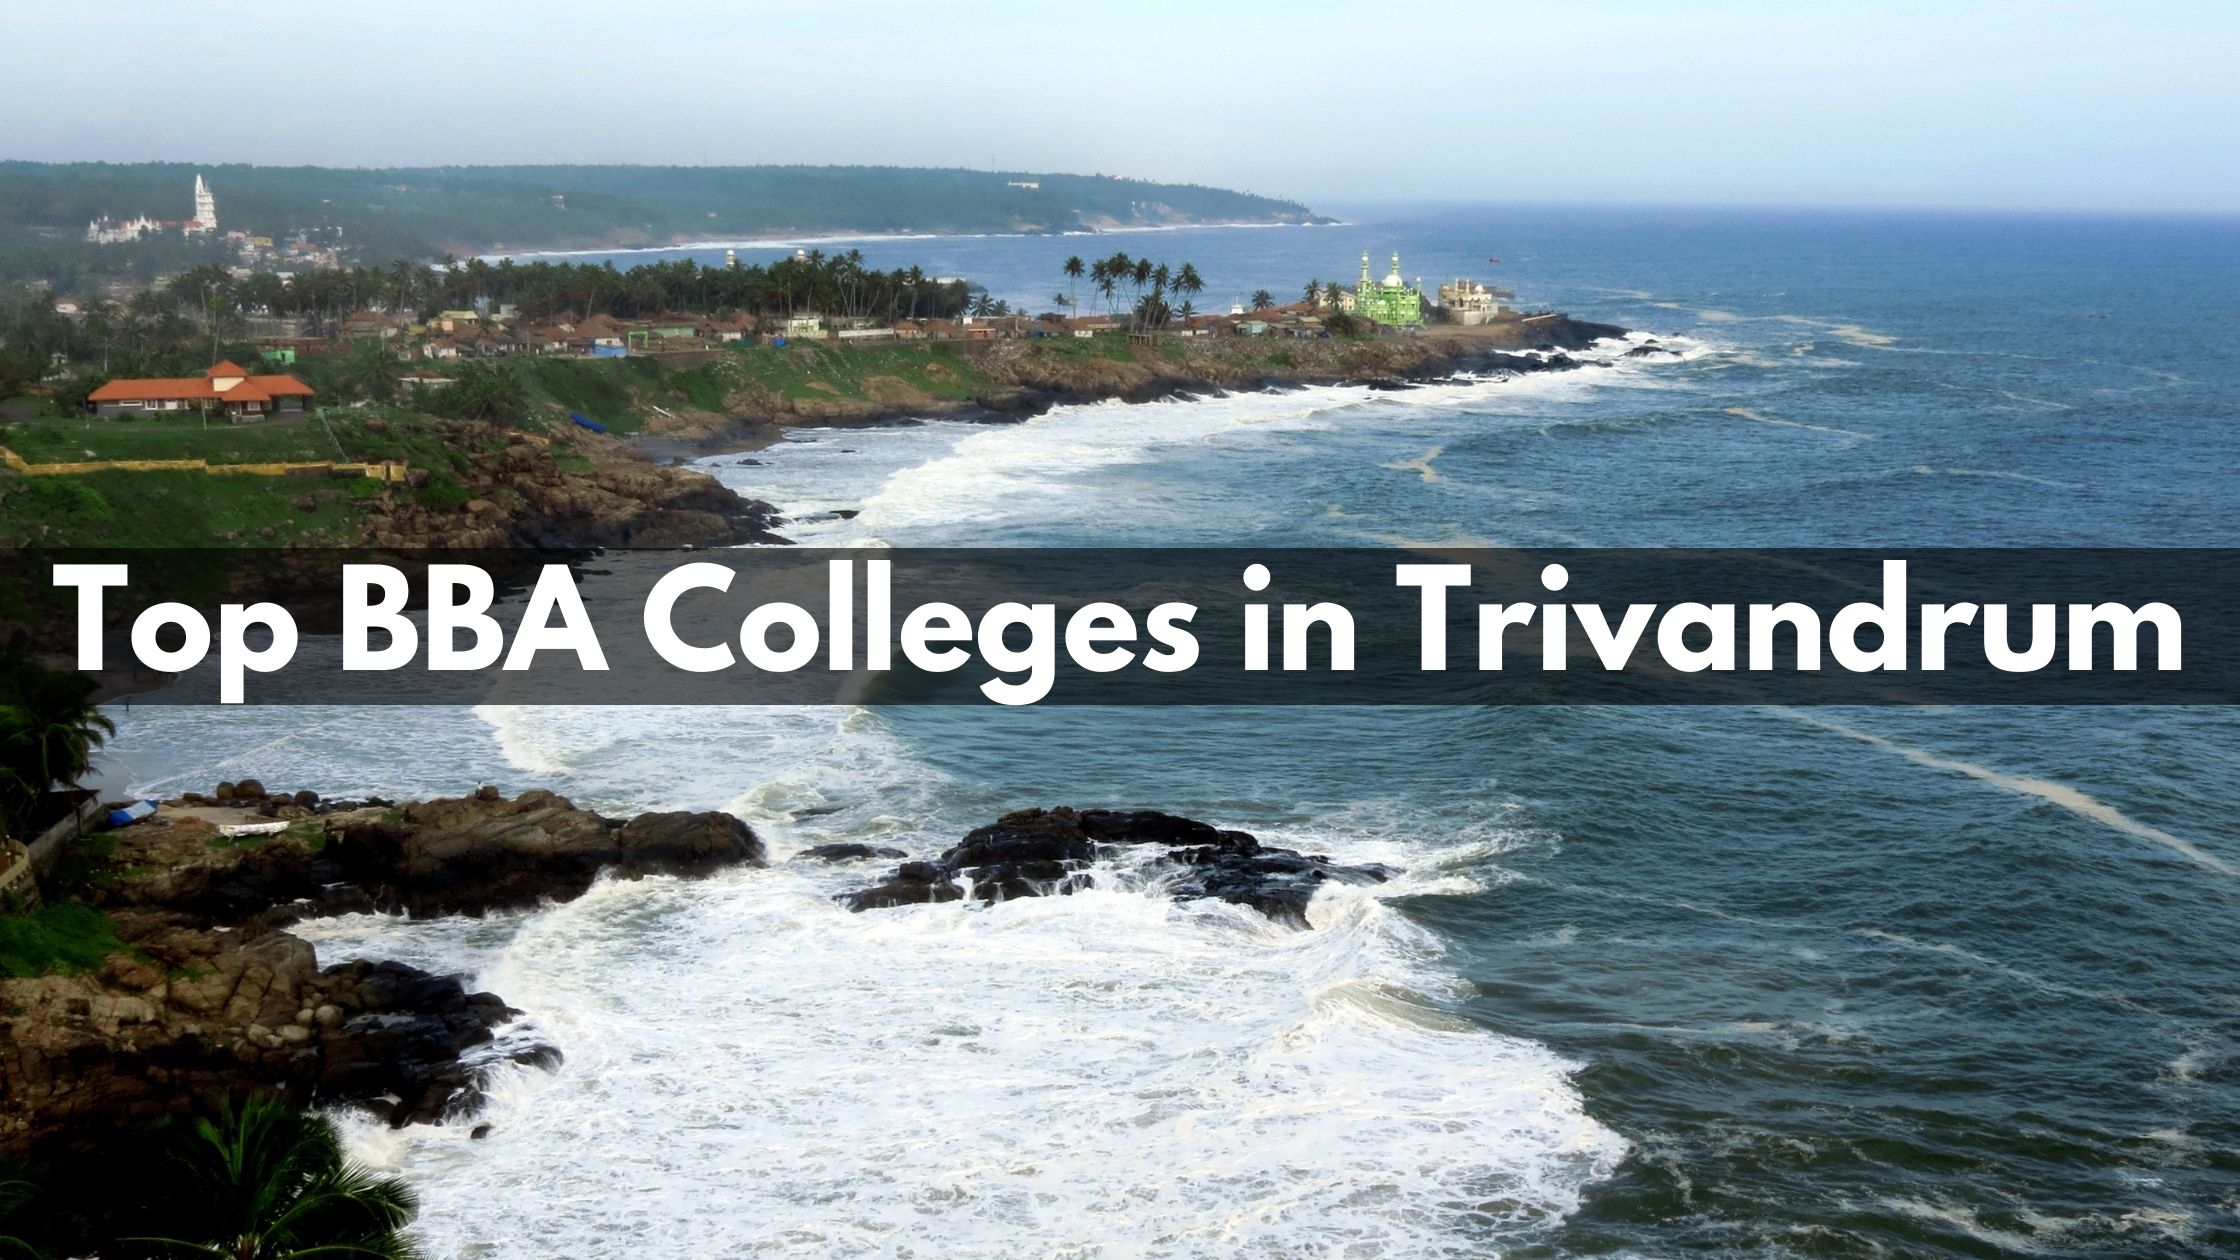 BBA Colleges in Trivandrum